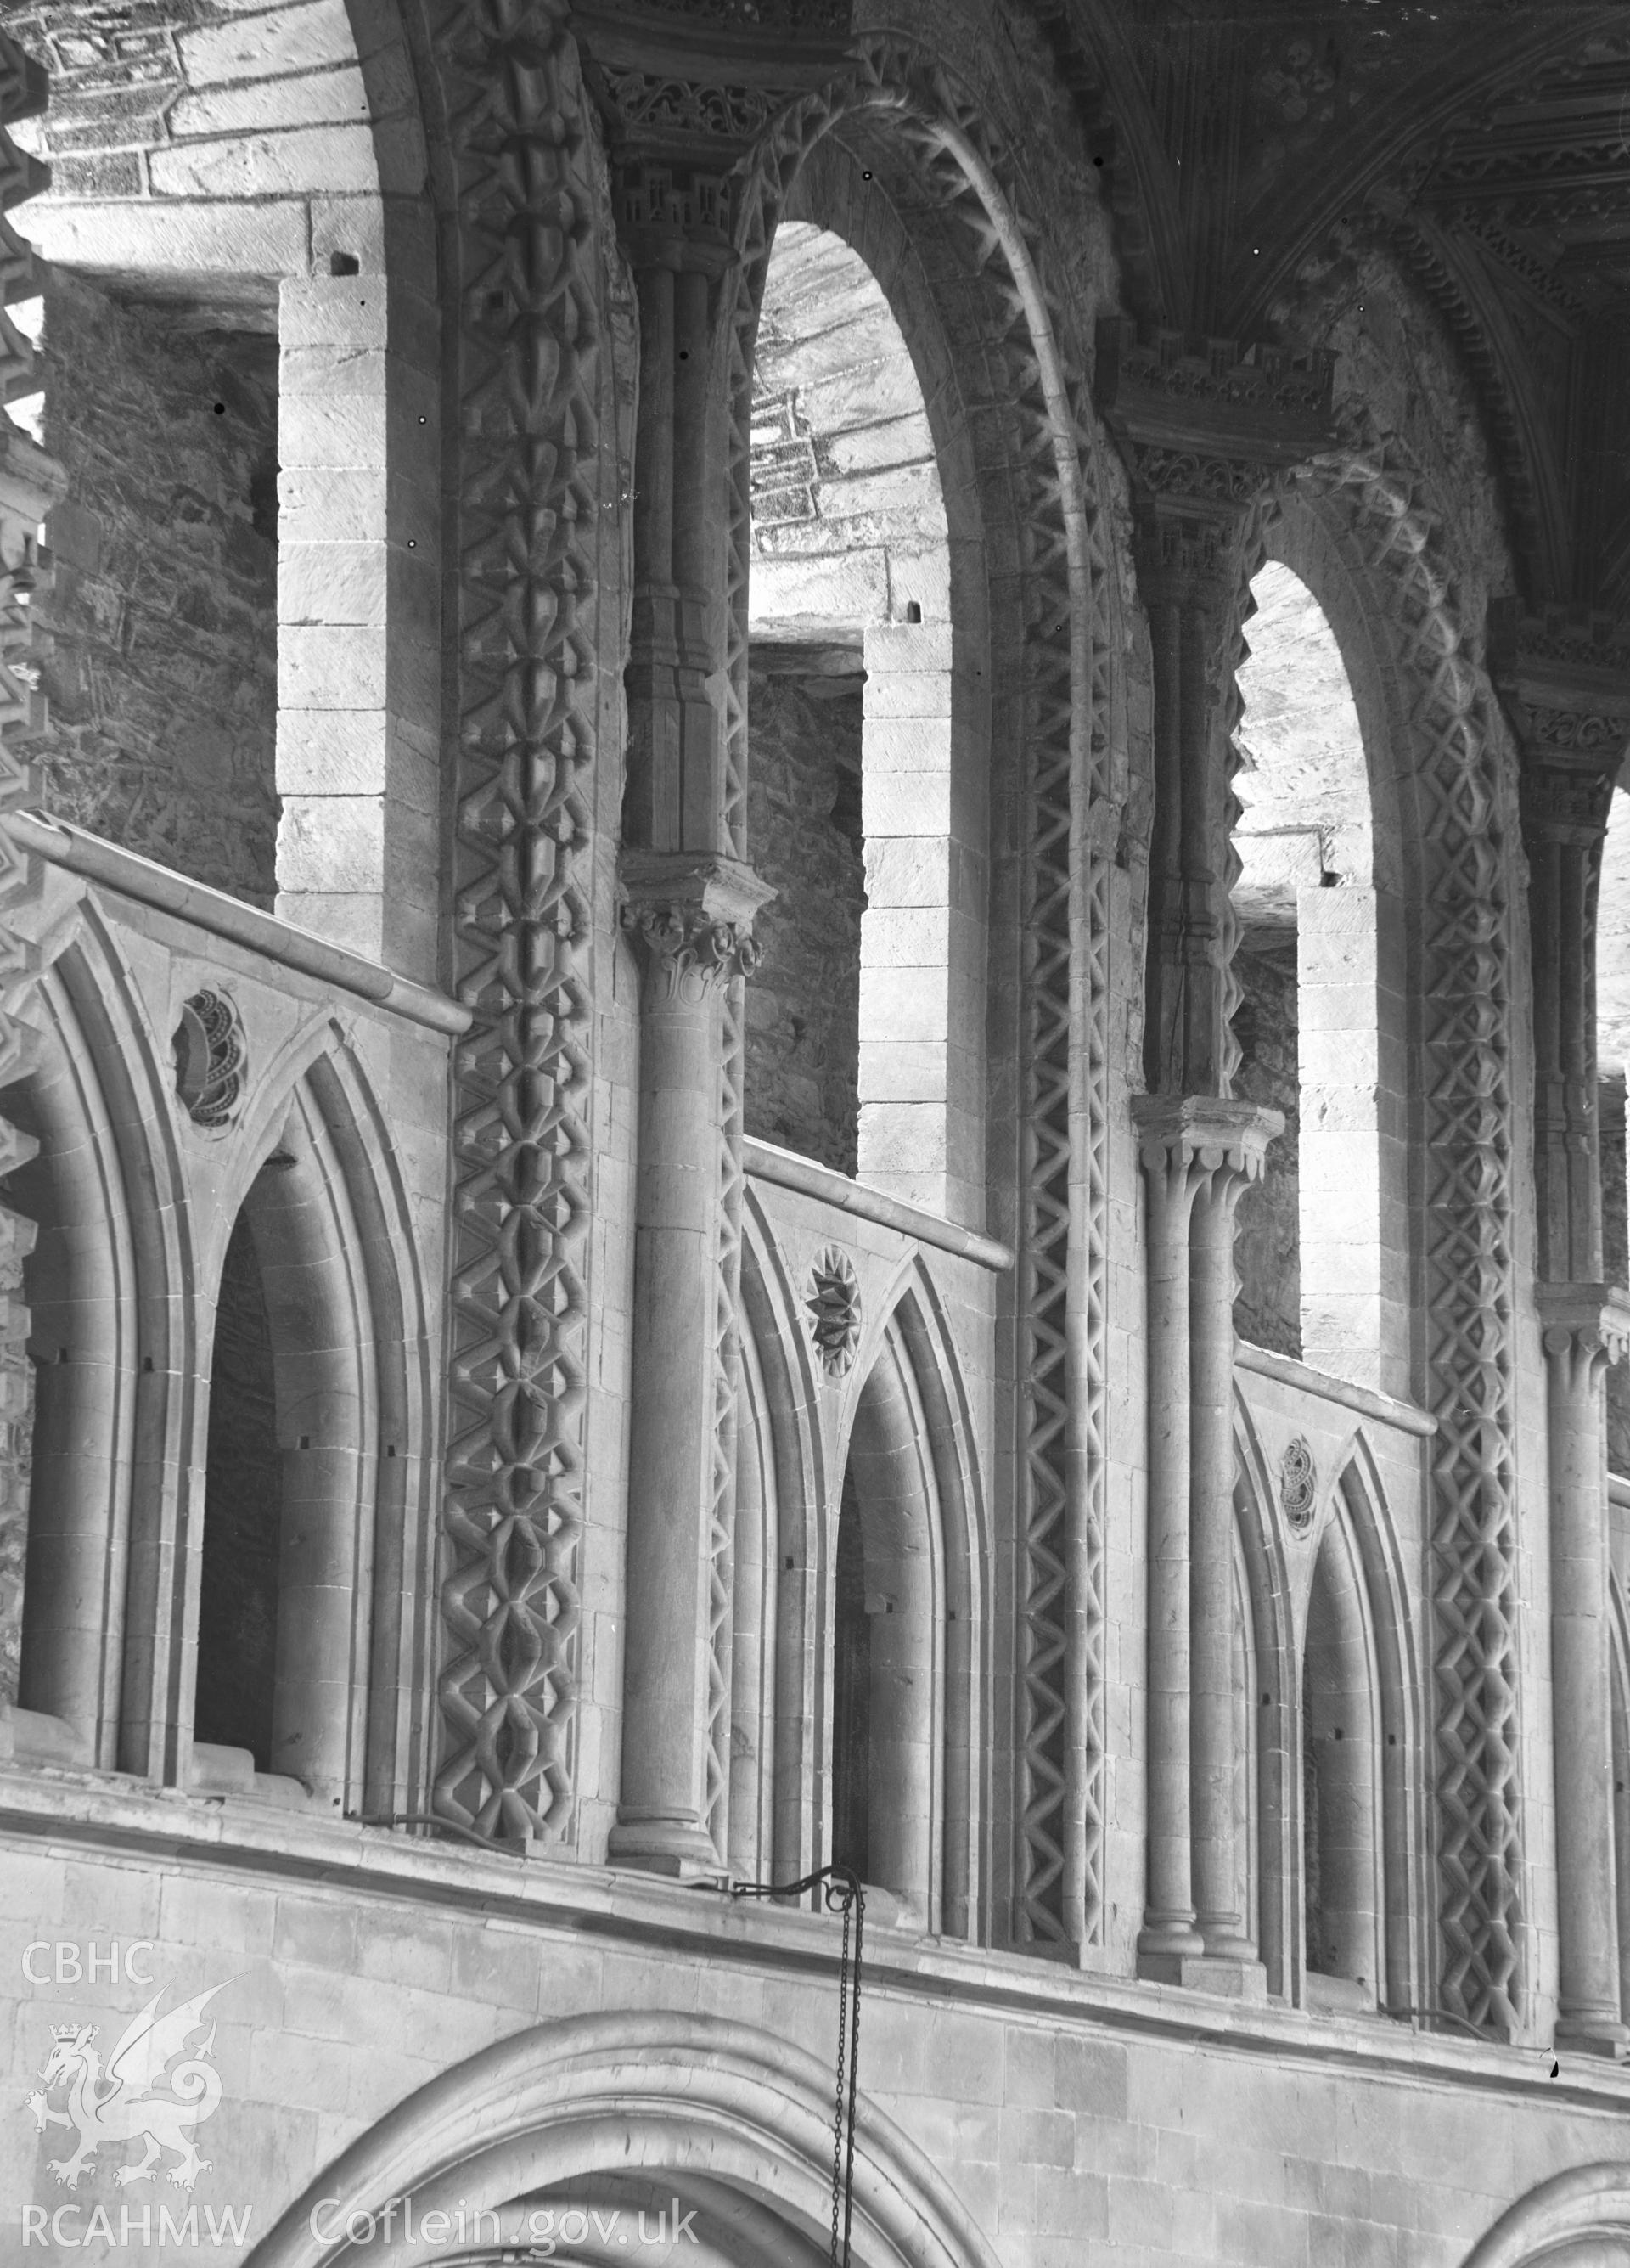 Digital copy of a black and white nitrate negative showing view of arches at St. David's Cathedral, taken by E.W. Lovegrove, July 1936.